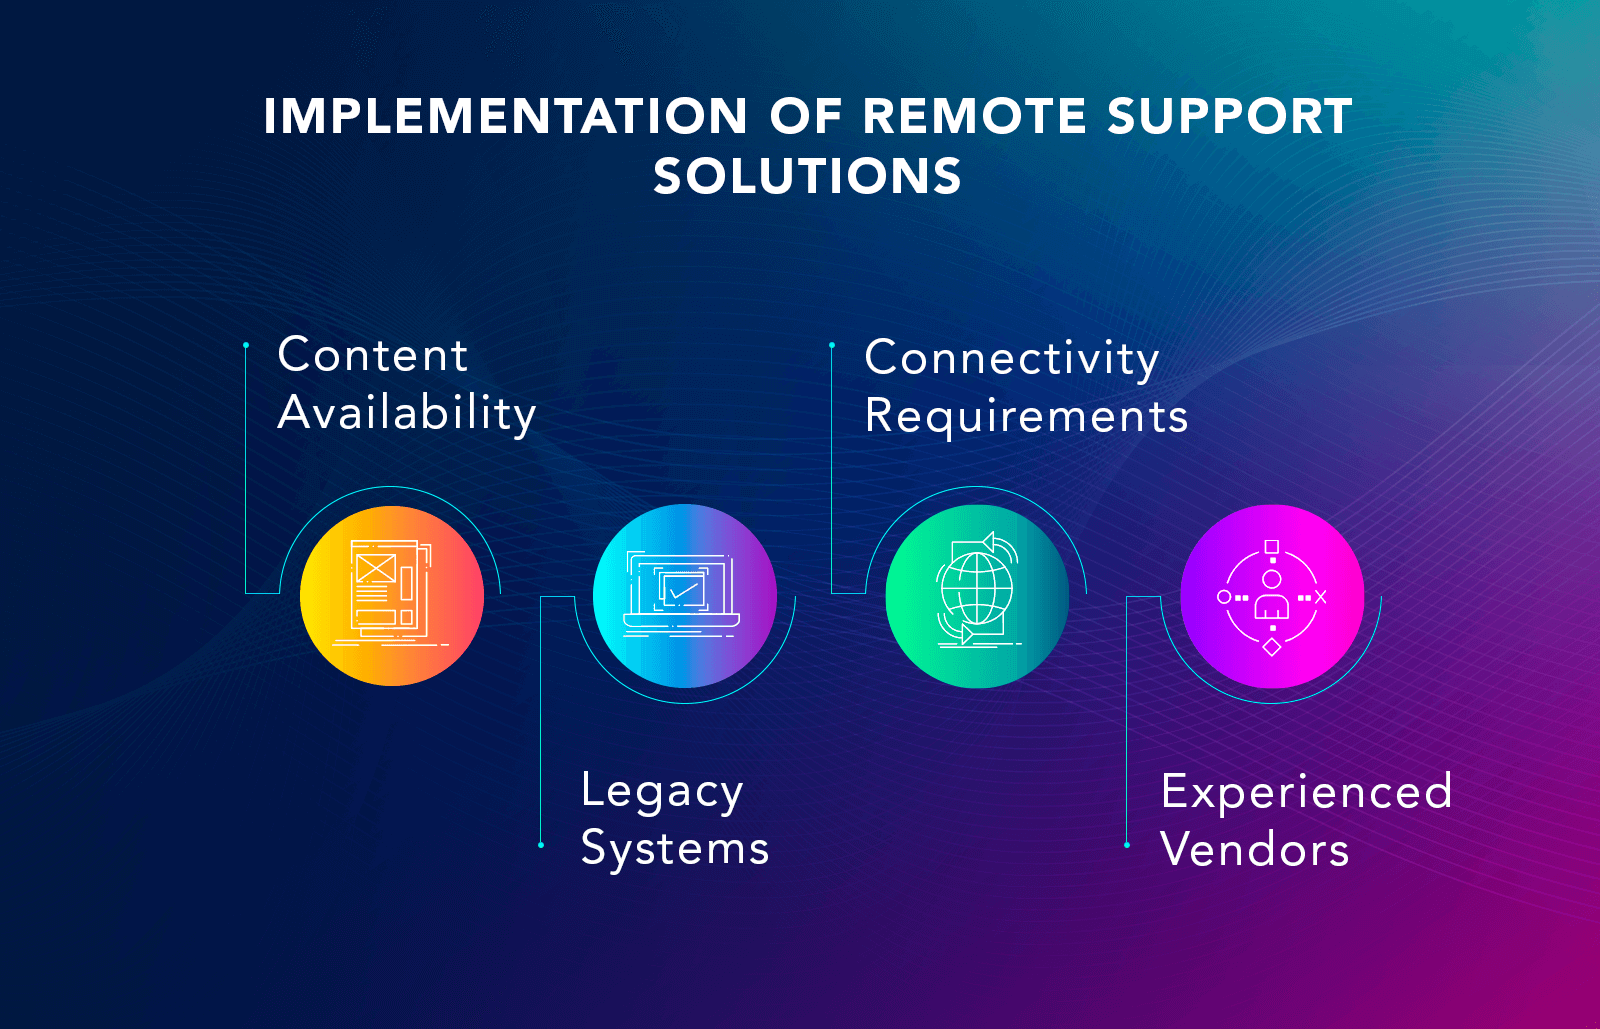 Implementation of Remote Support Solutions
﻿